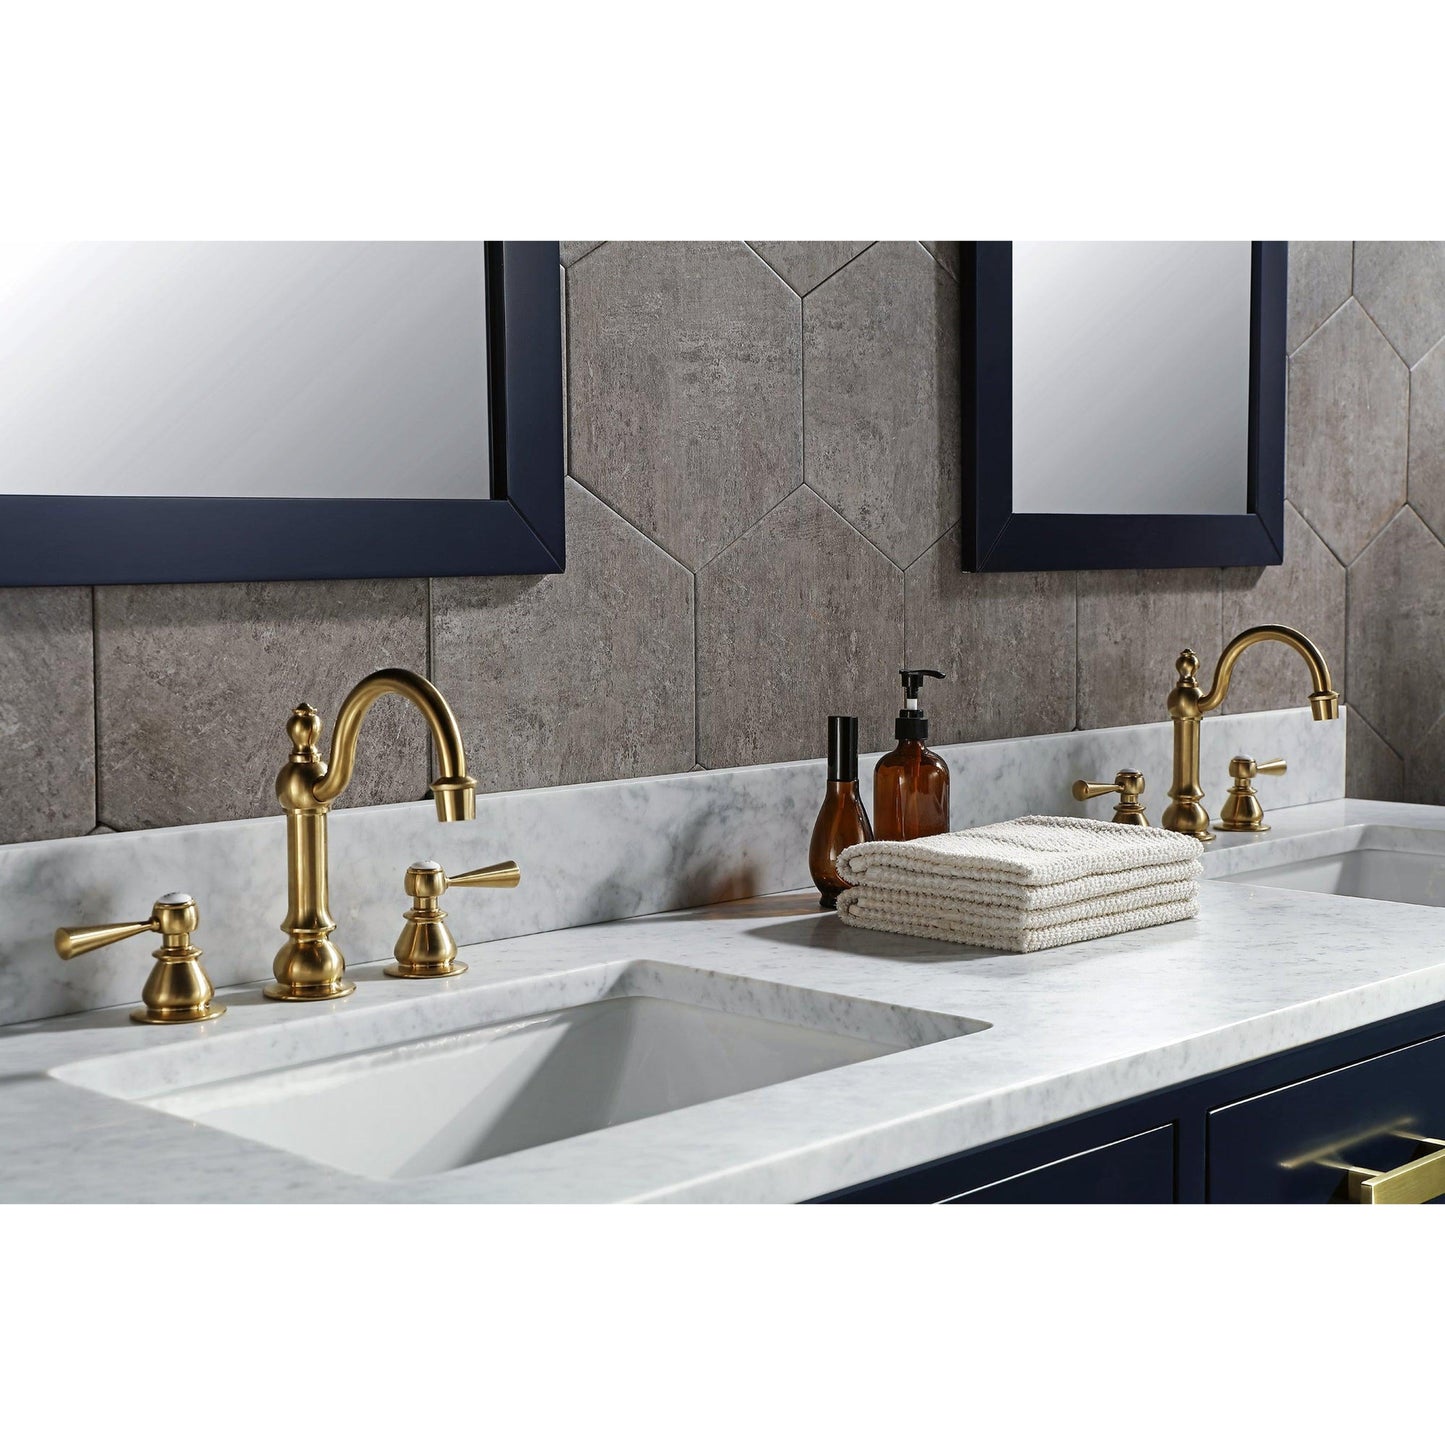 Water Creation Madison 72" Double Sink Carrara White Marble Vanity In Monarch Blue With Matching Mirror(s) and F2-0012-06-TL Lavatory Faucet(s)